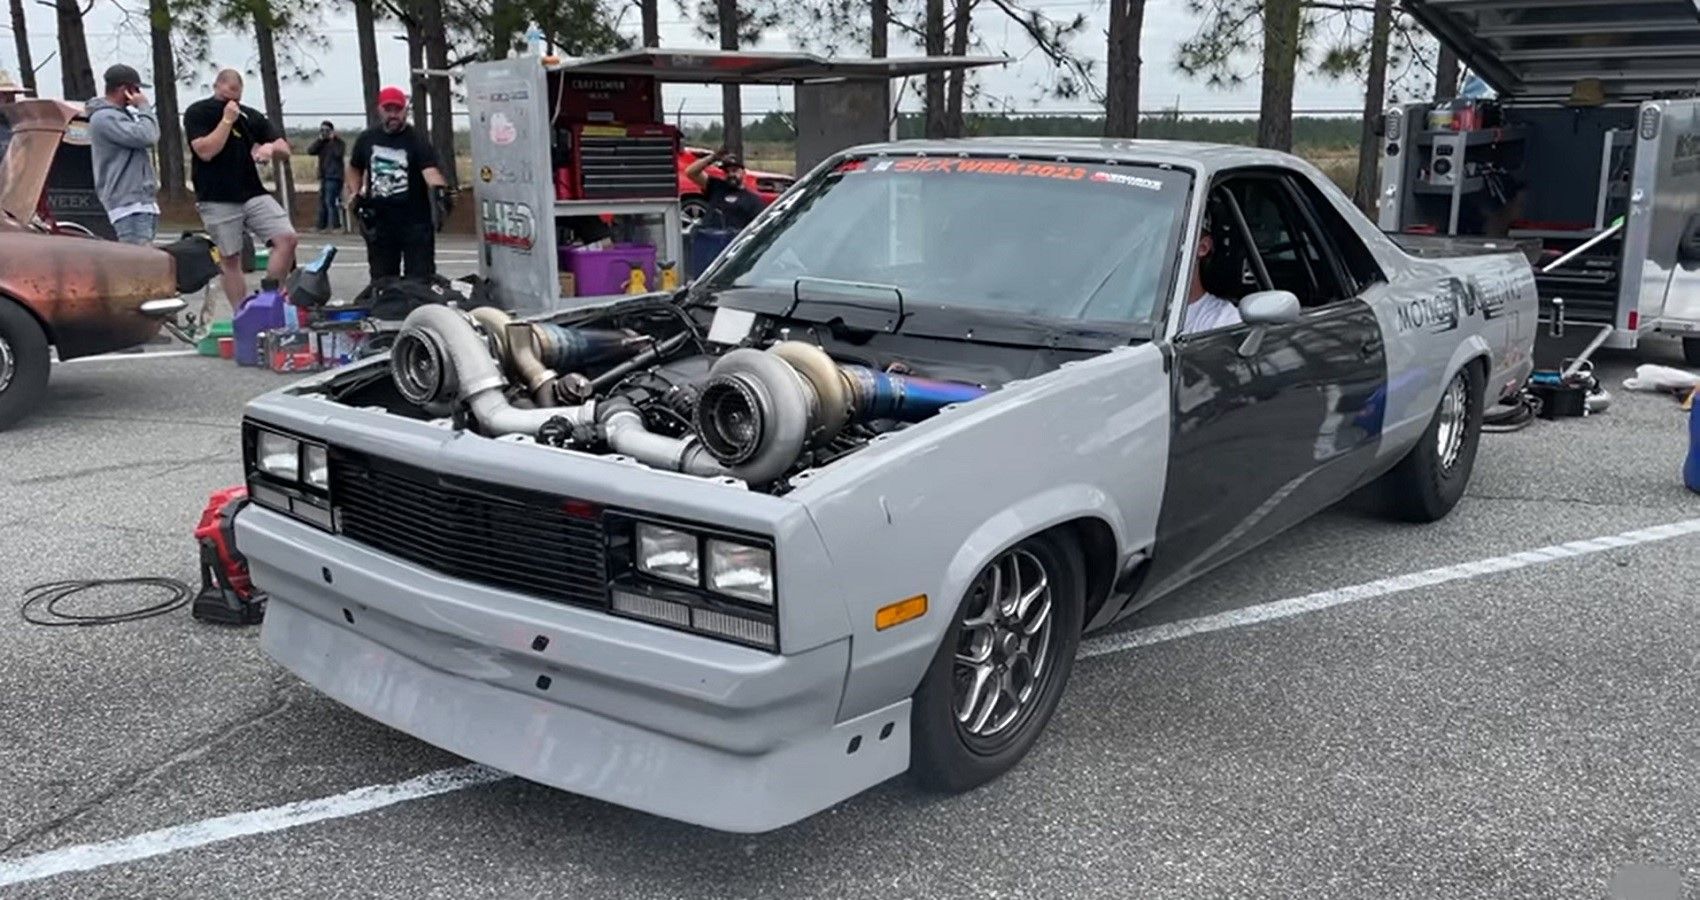 El Camino drag racer, off-white and gray color, front quarter view